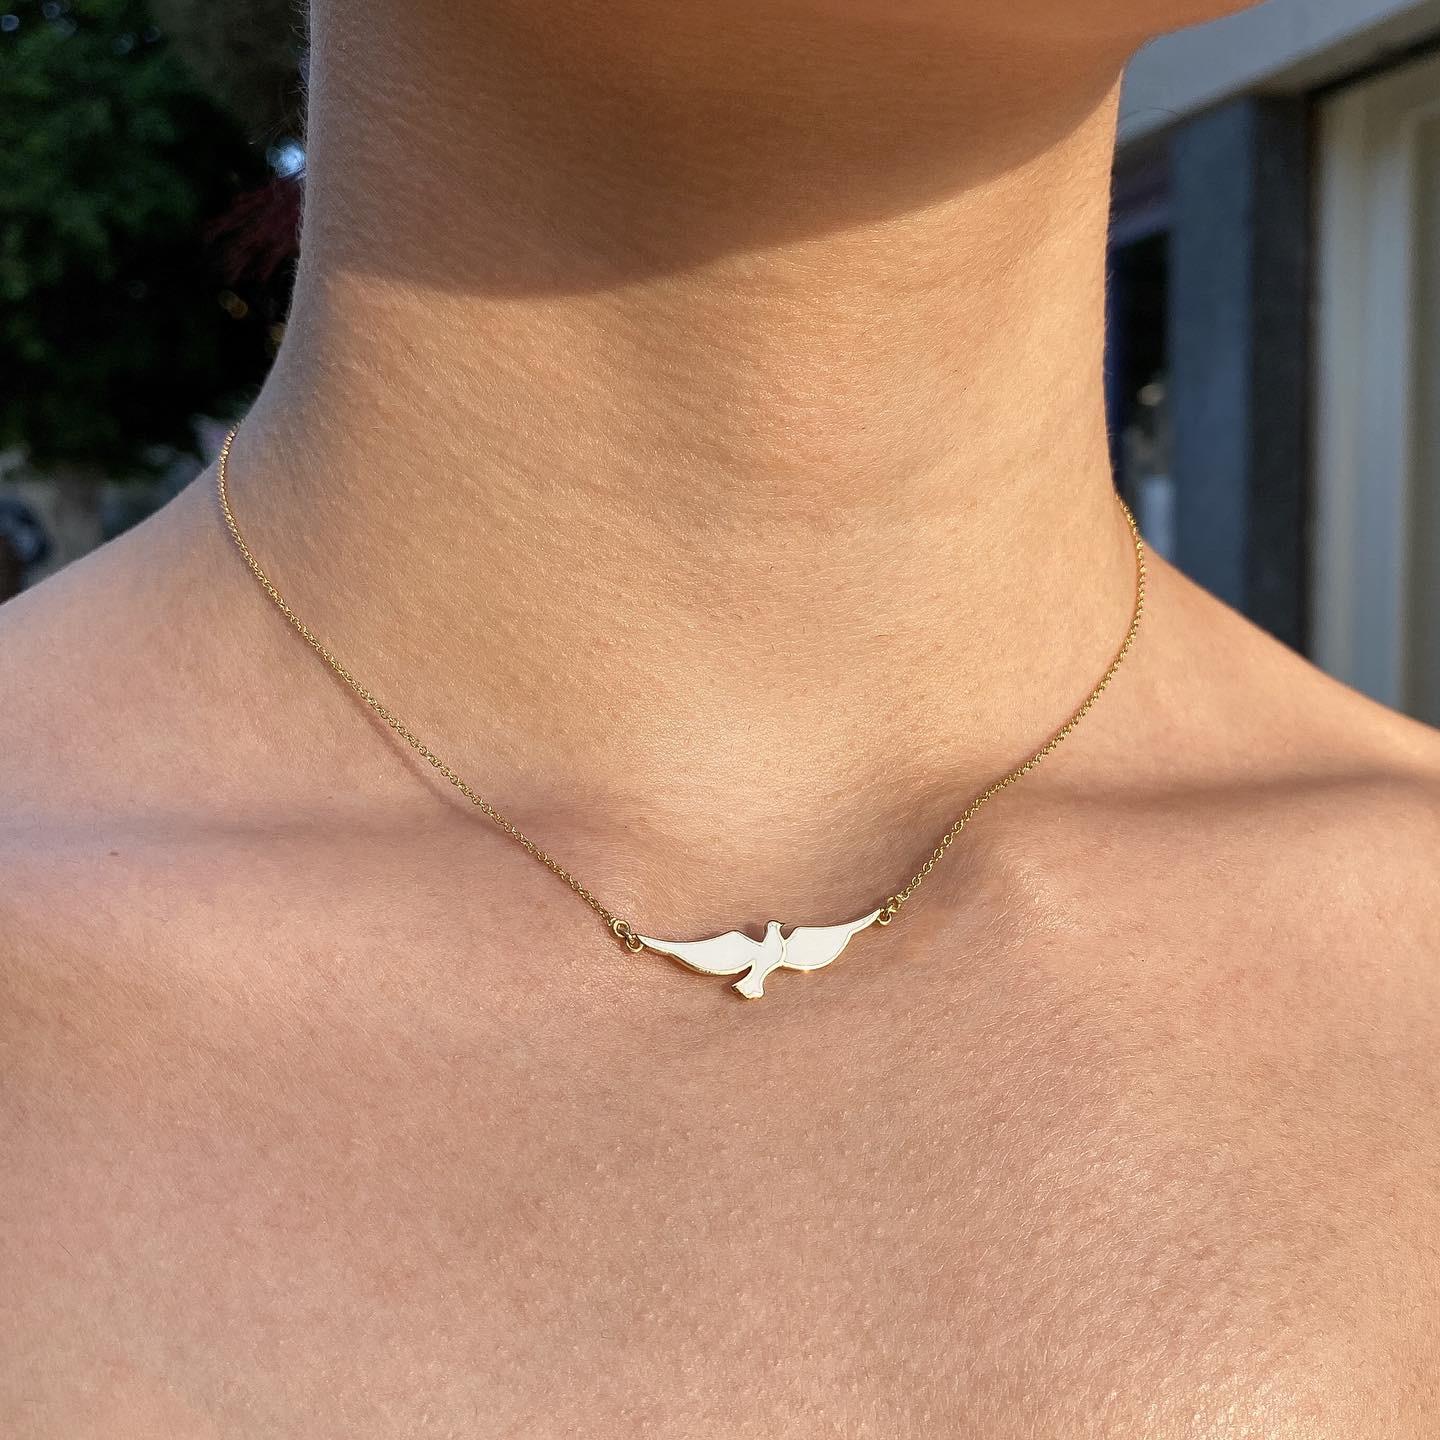 Maria Kotsoni Contemporary 18k Gold Flying Dove White Enamel Pendant Necklace In New Condition For Sale In Nicosia, CY